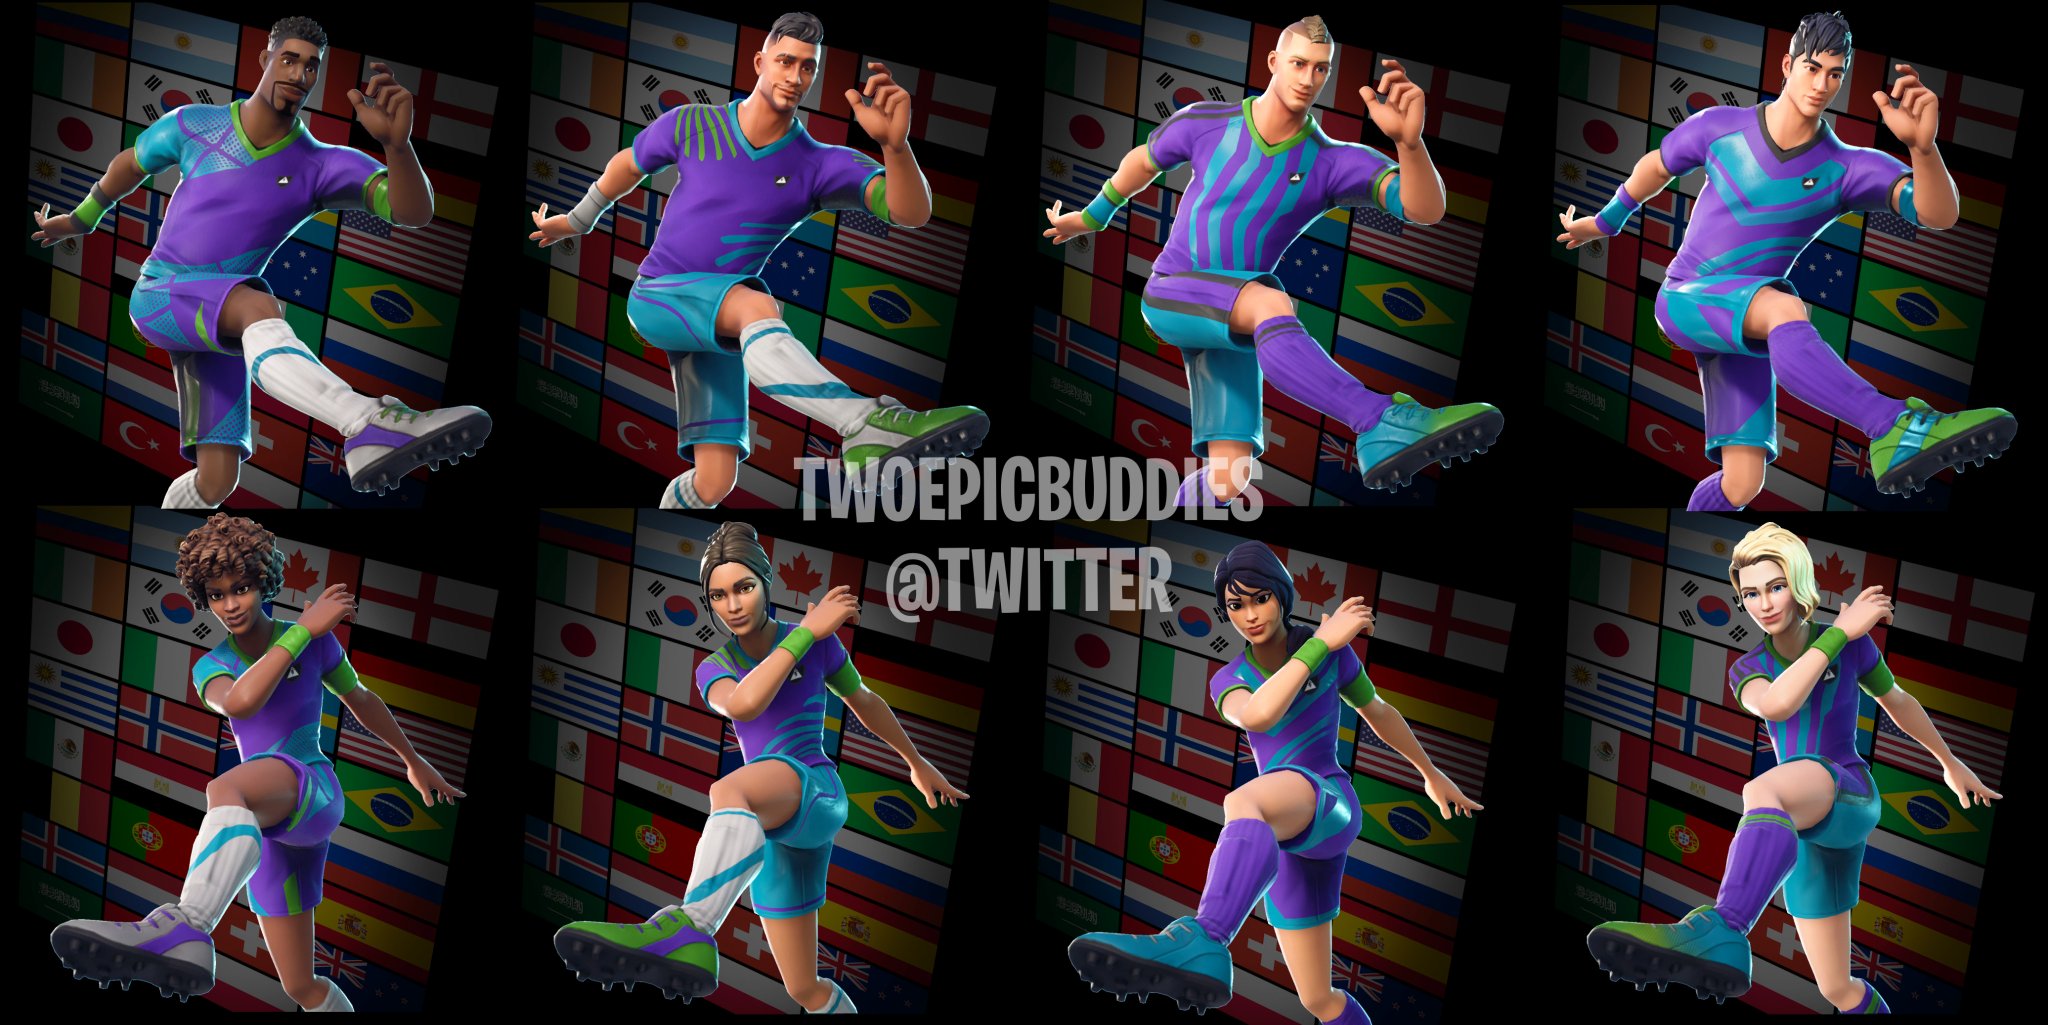 Maestro ressource Interaktion Datamining Suggests Football/Soccer Skins Will Be Customizable in Fortnite  - Fortnite Insider